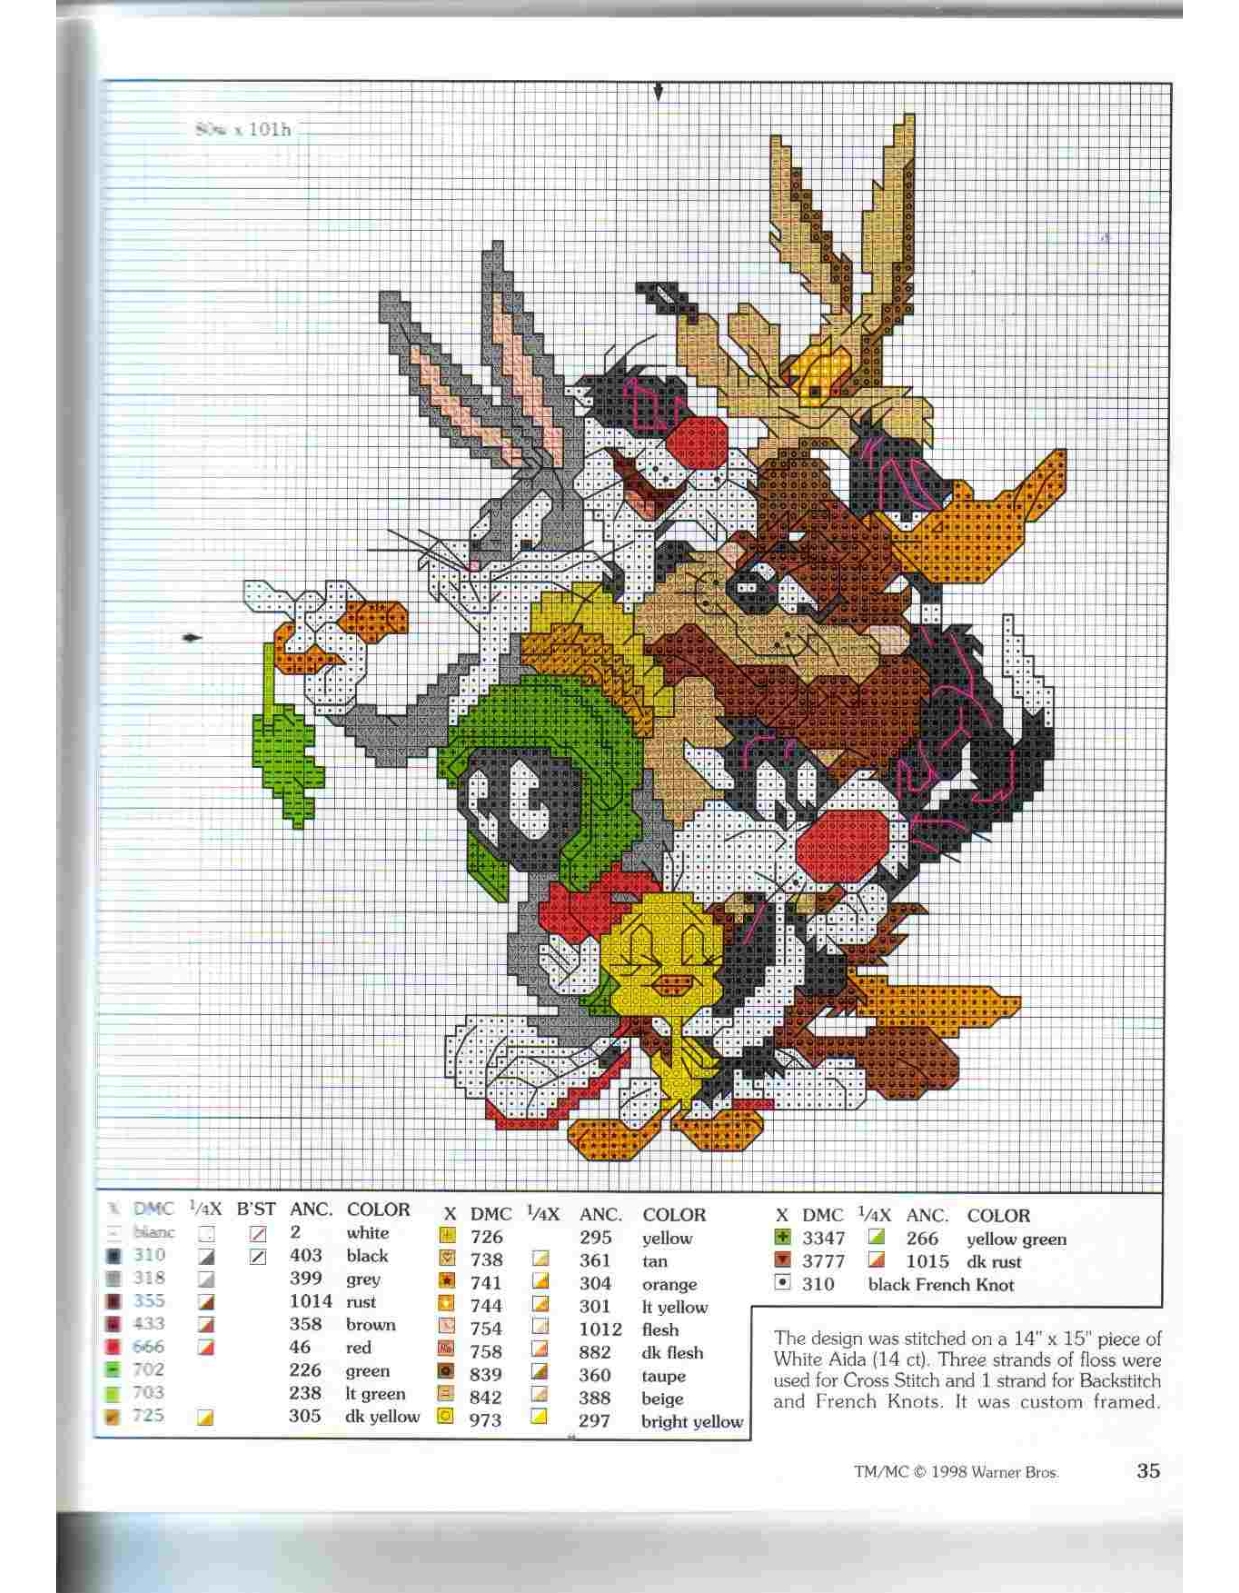 Looney Tunes characters cross stitch patterns - free cross stitch patterns  crochet knitting amigurumi